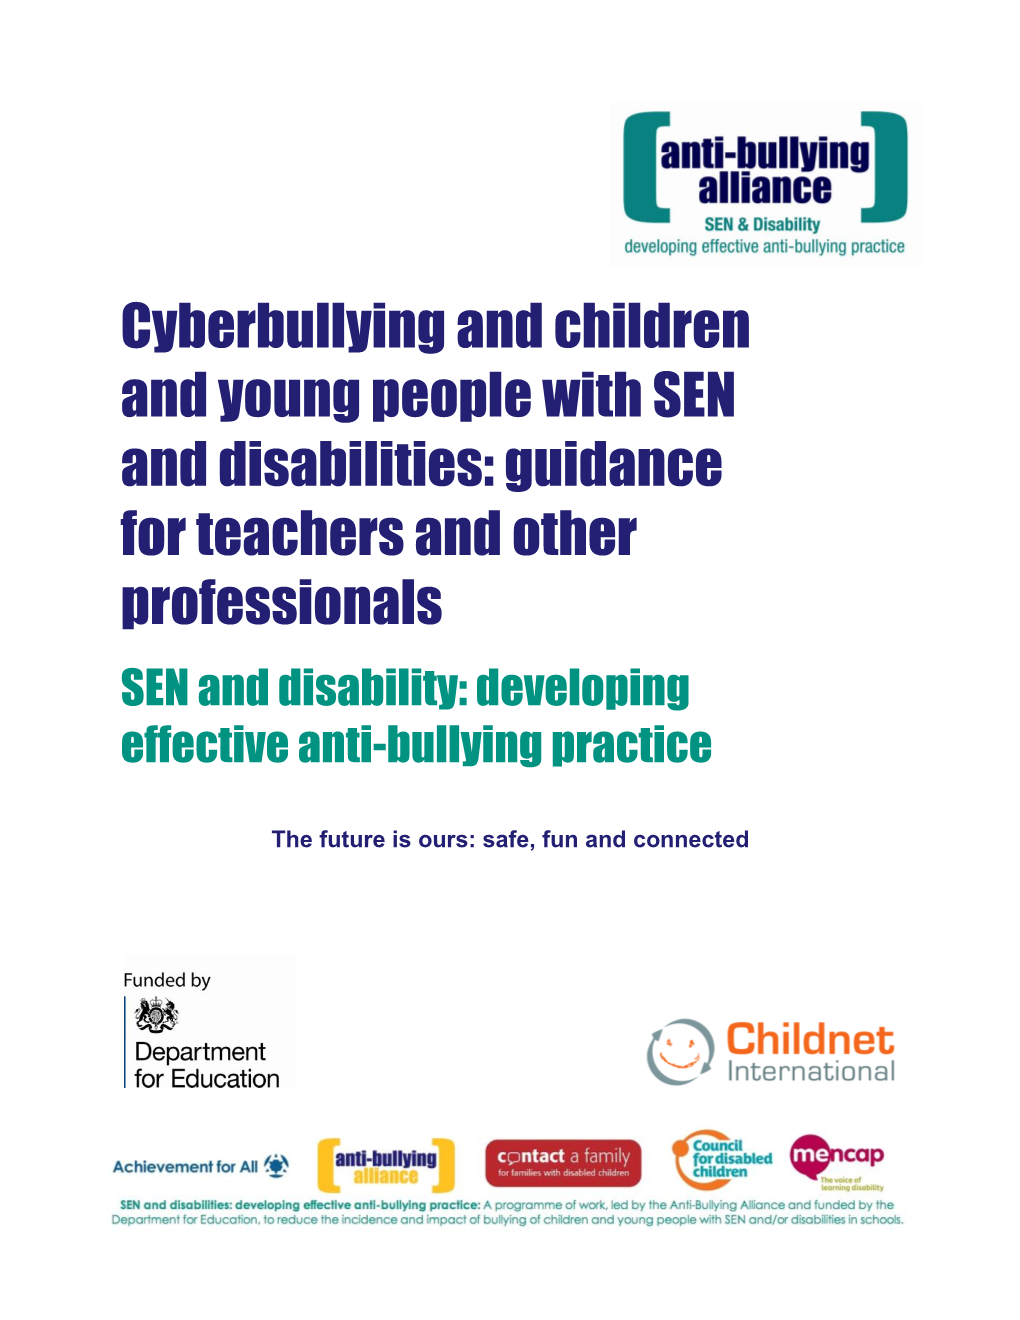 Cyberbullying and Children and Young People with SEN and Disabilities: Guidance for Teachers and Other Professionals